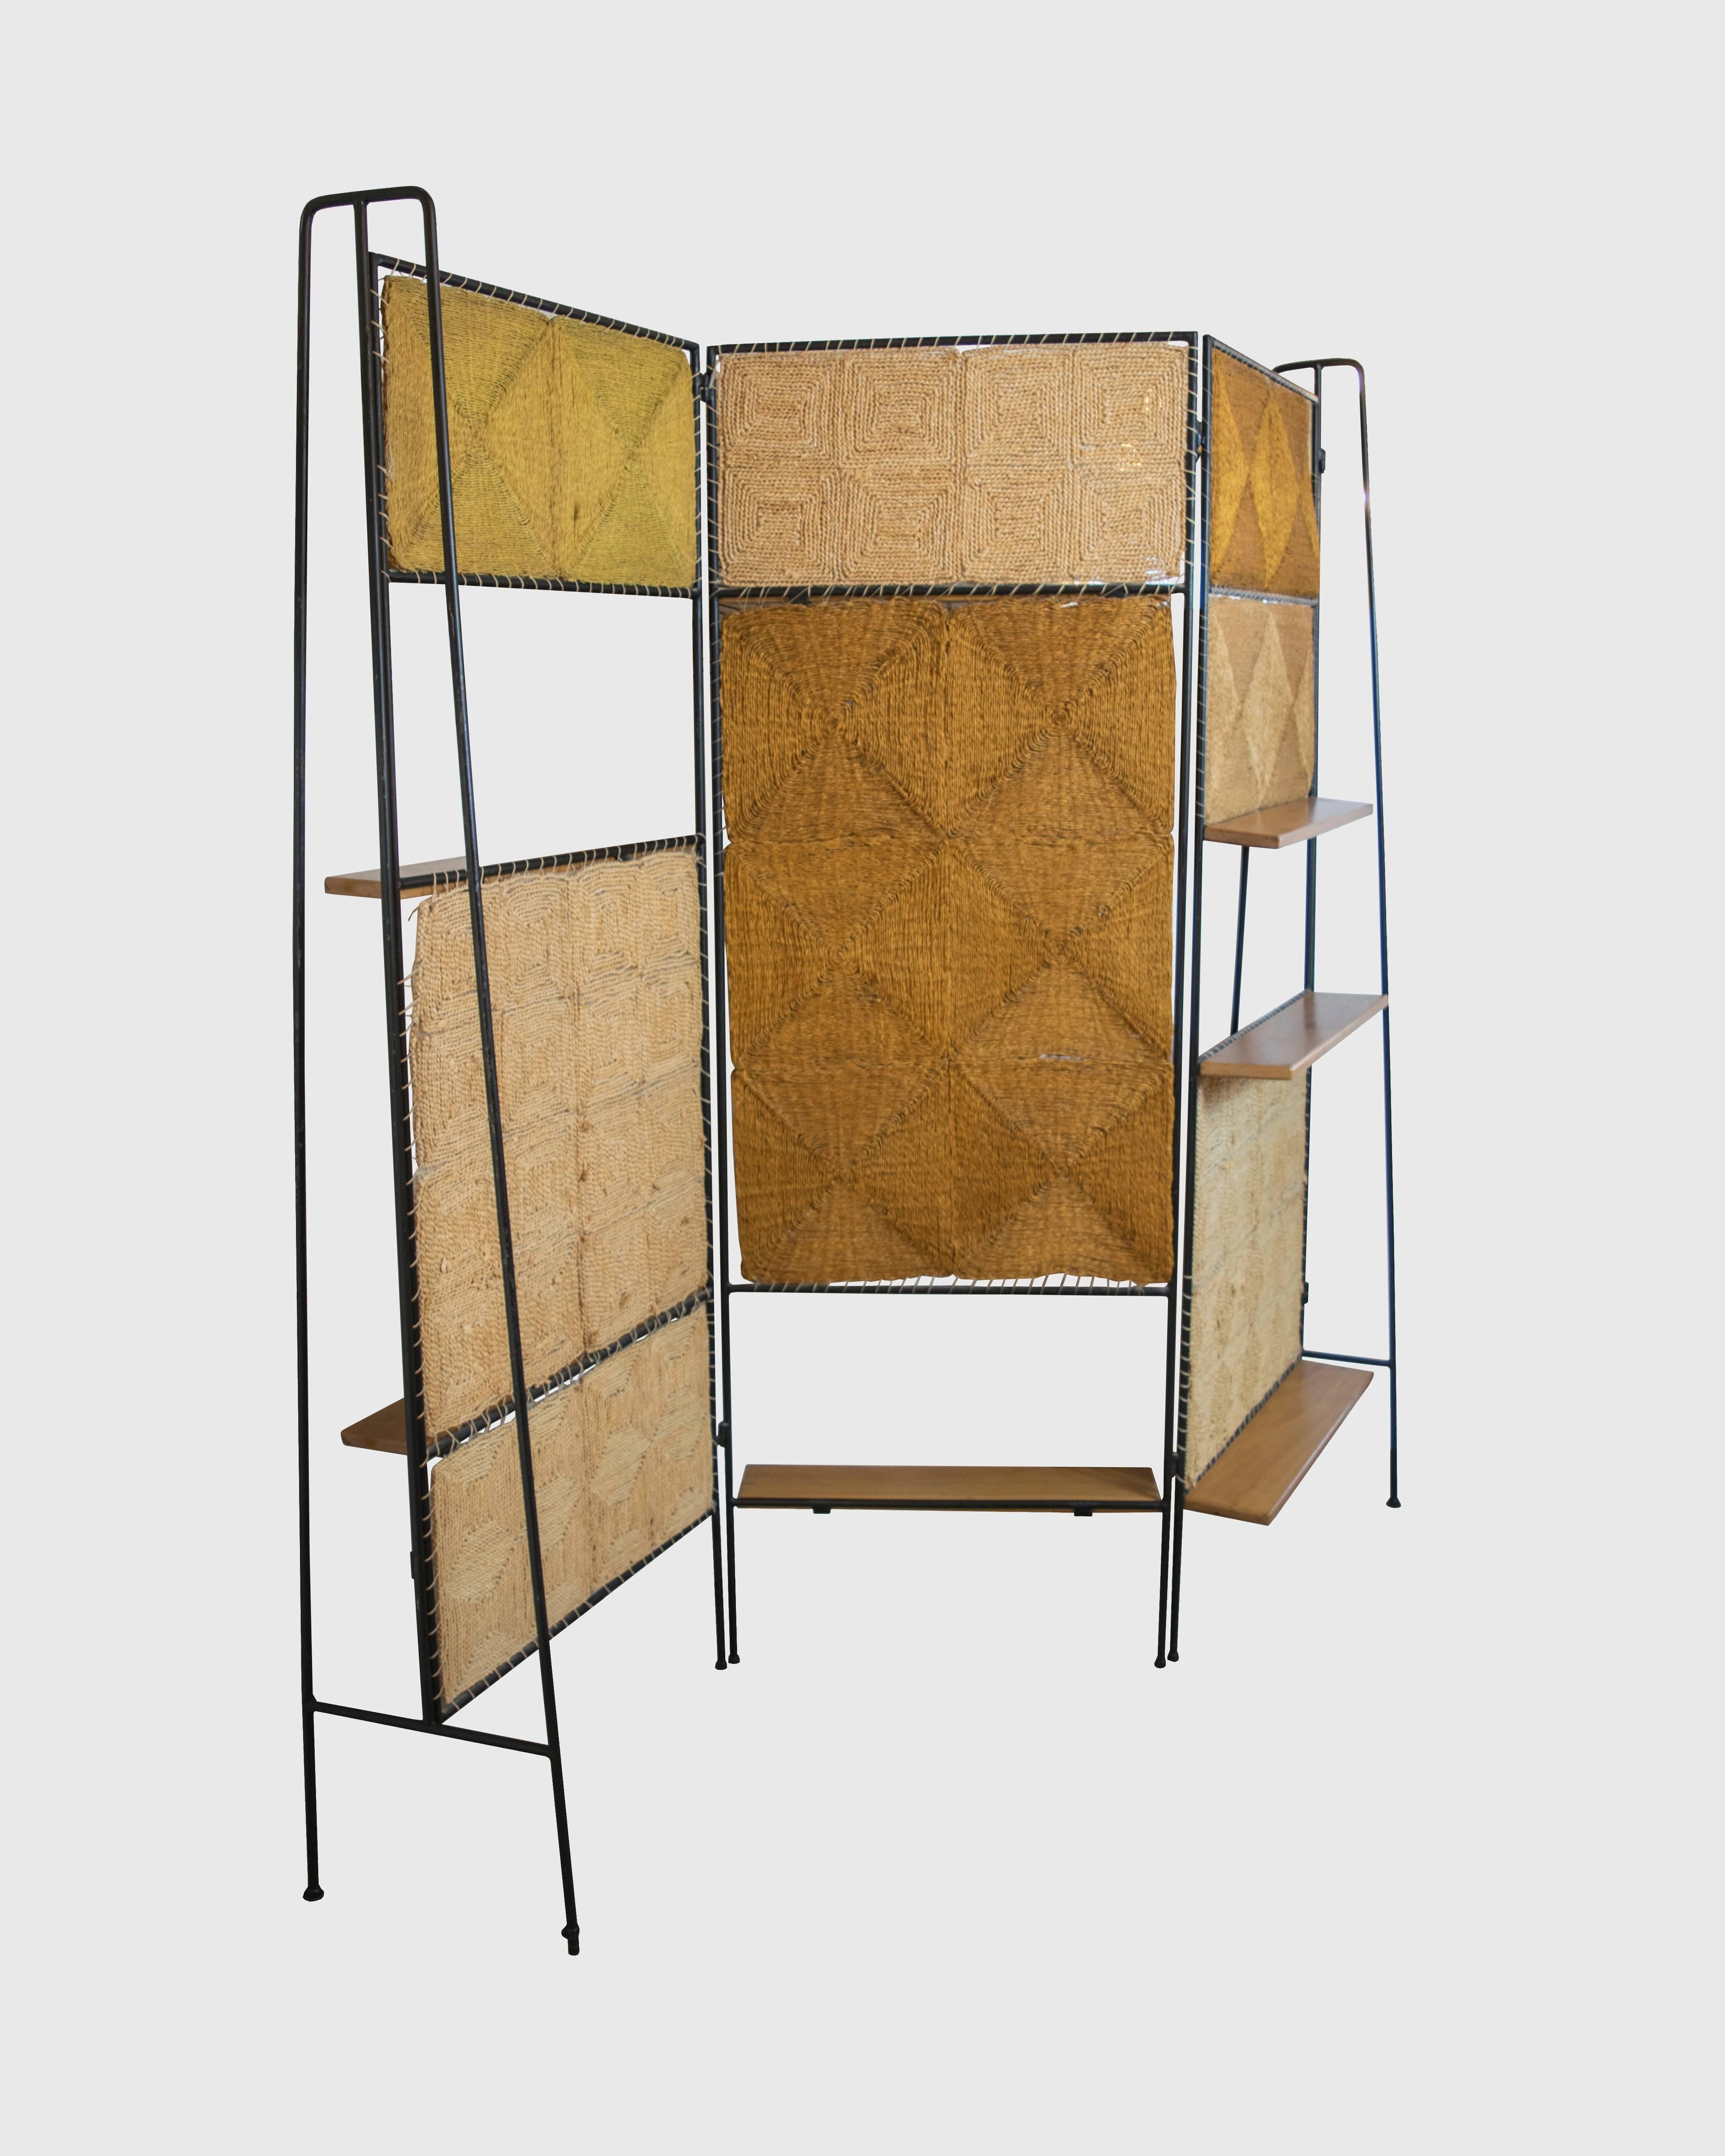 This is an extraordinary and rare tri-fold wrought iron screen with amazing hand detailing and patterning within the woven screen panels. We do not know who the designer was of this fantastic screen, it looks a bit like Frederick Weinberg or Arthur